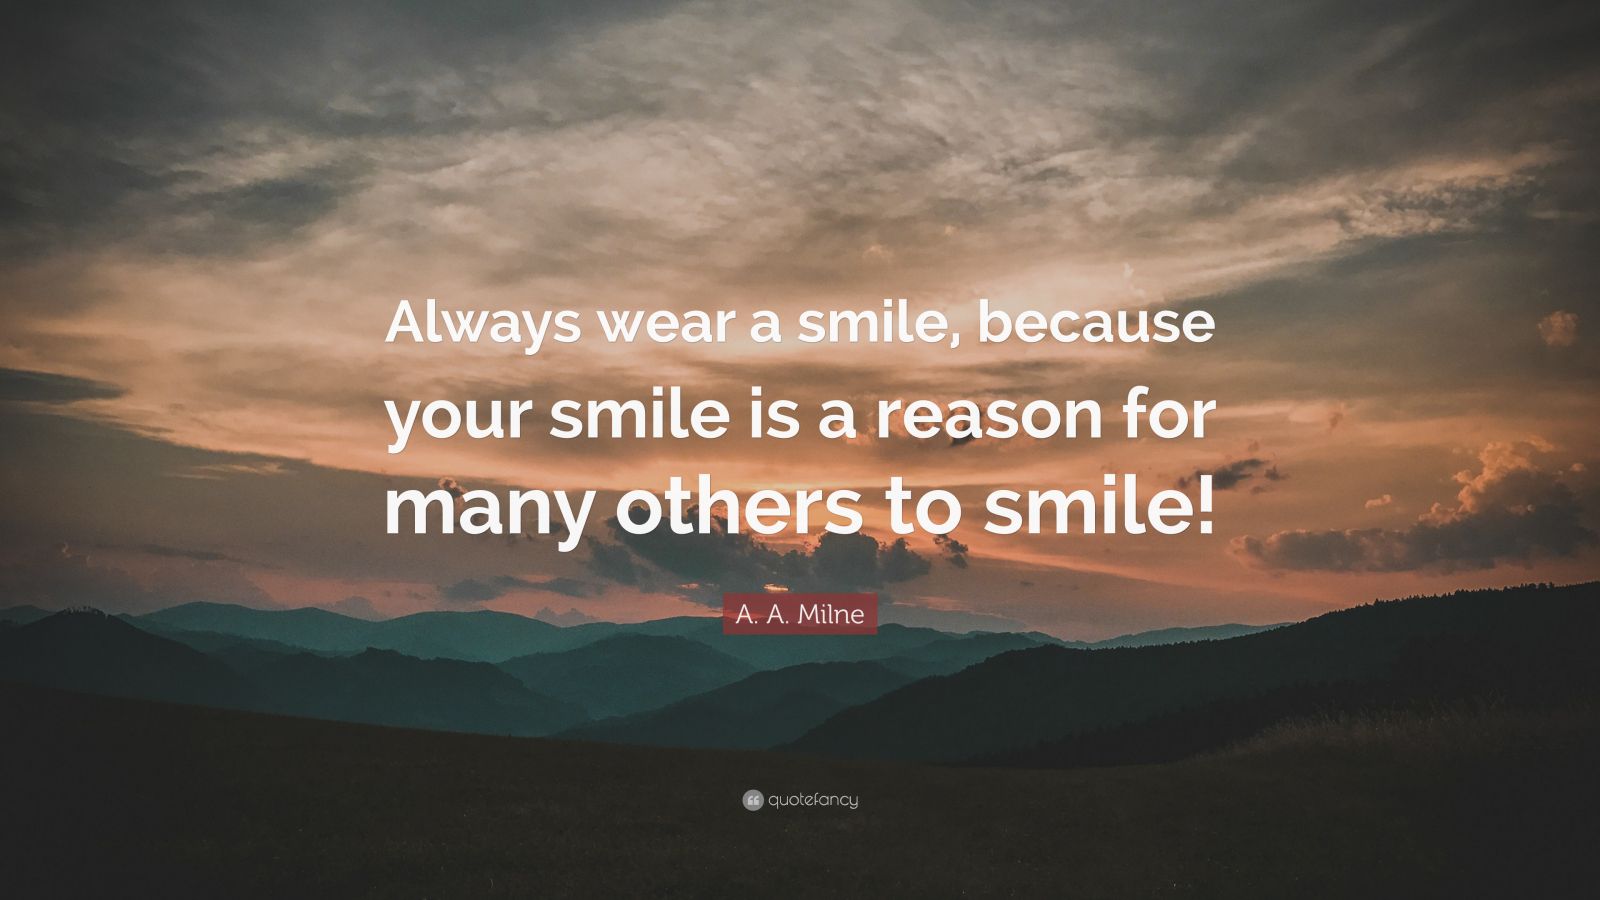 A. A. Milne Quote: “Always wear a smile, because your smile is a reason ...